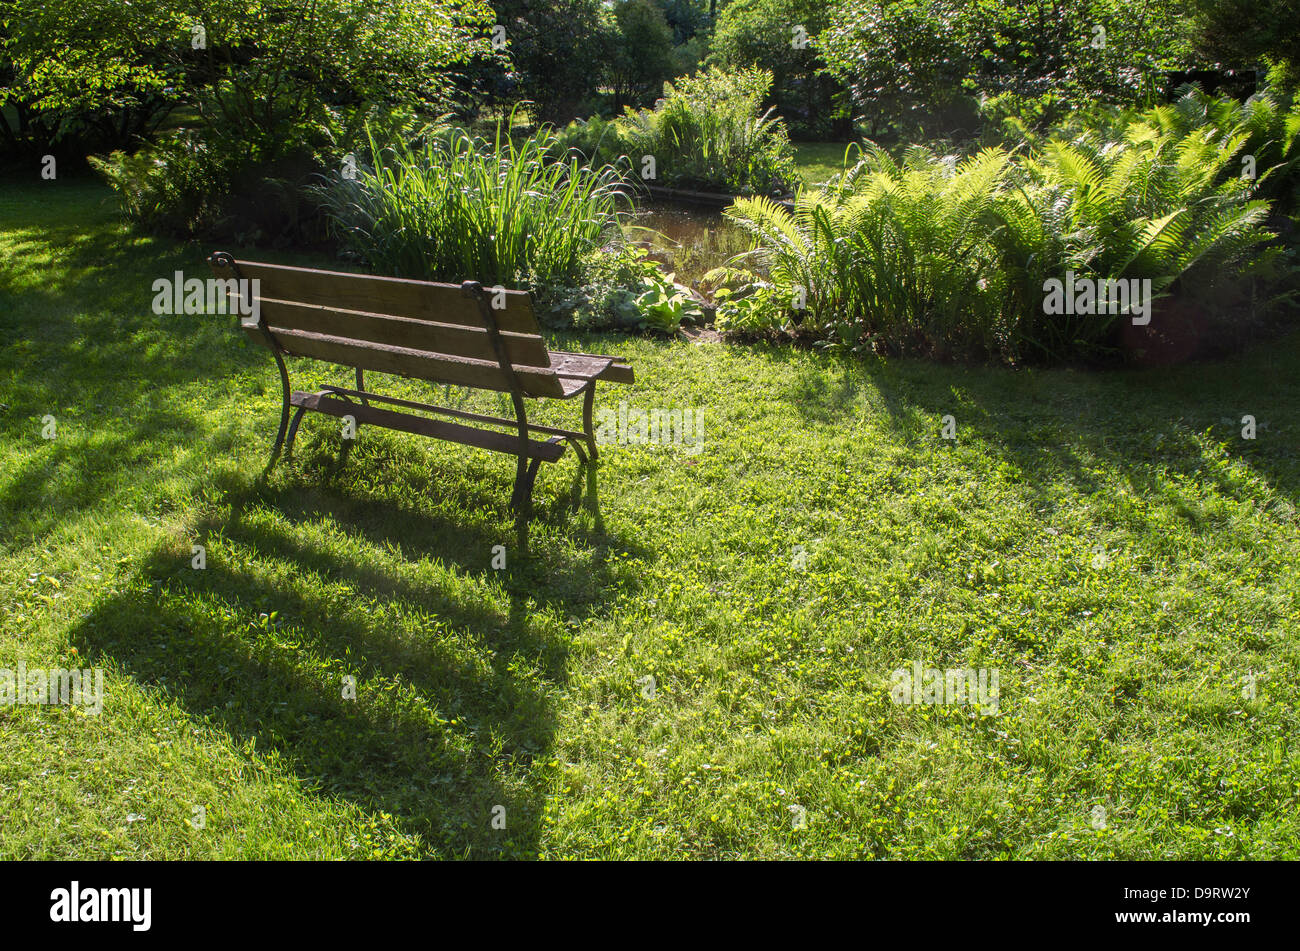 wood bench in front of lush foliage Stock Photo